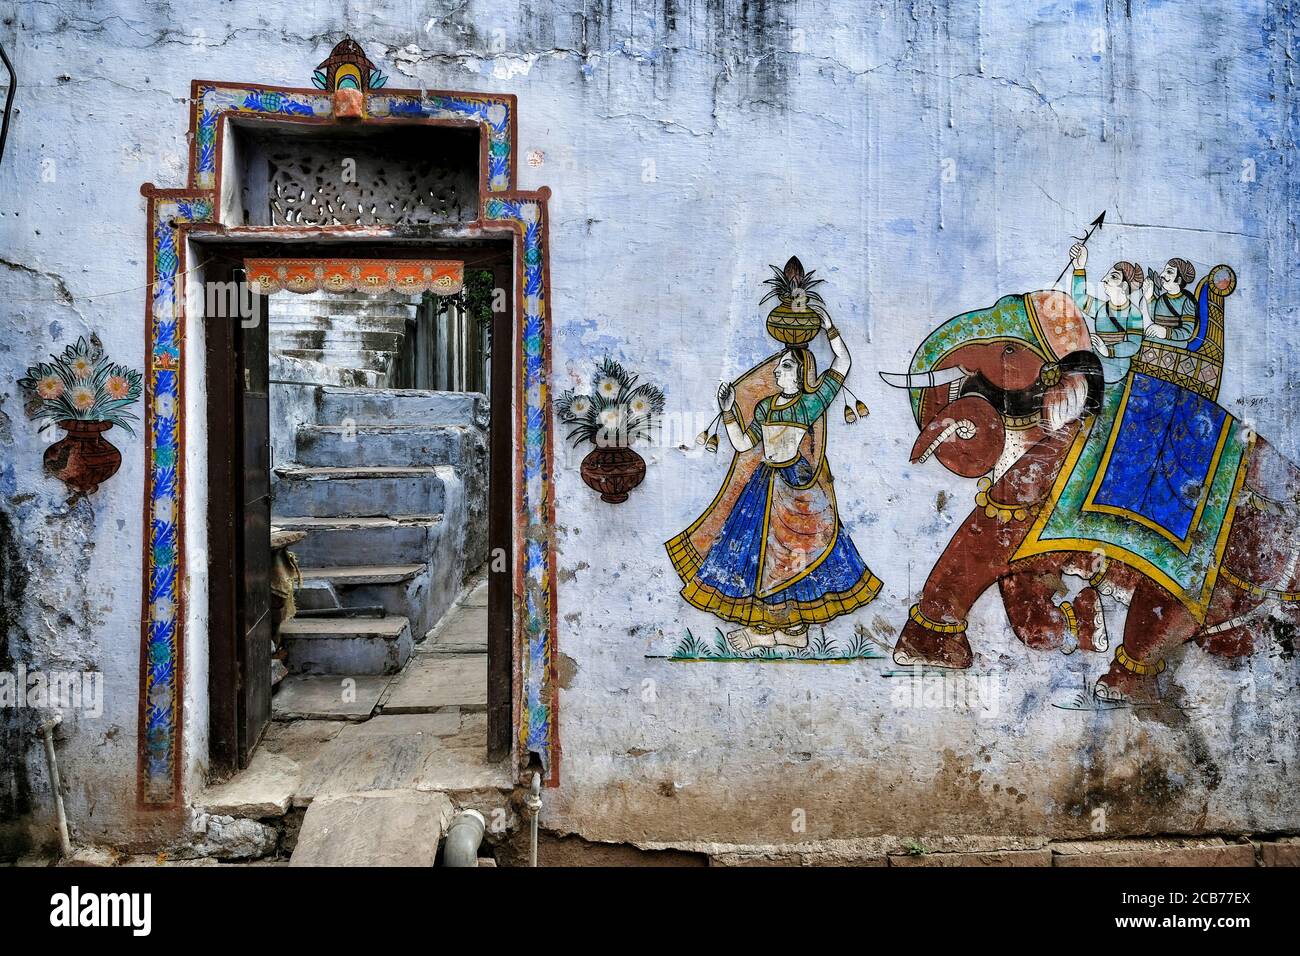 Traditional paintings on a wall in the old town of Bundi in Rajasthan, India. Stock Photo